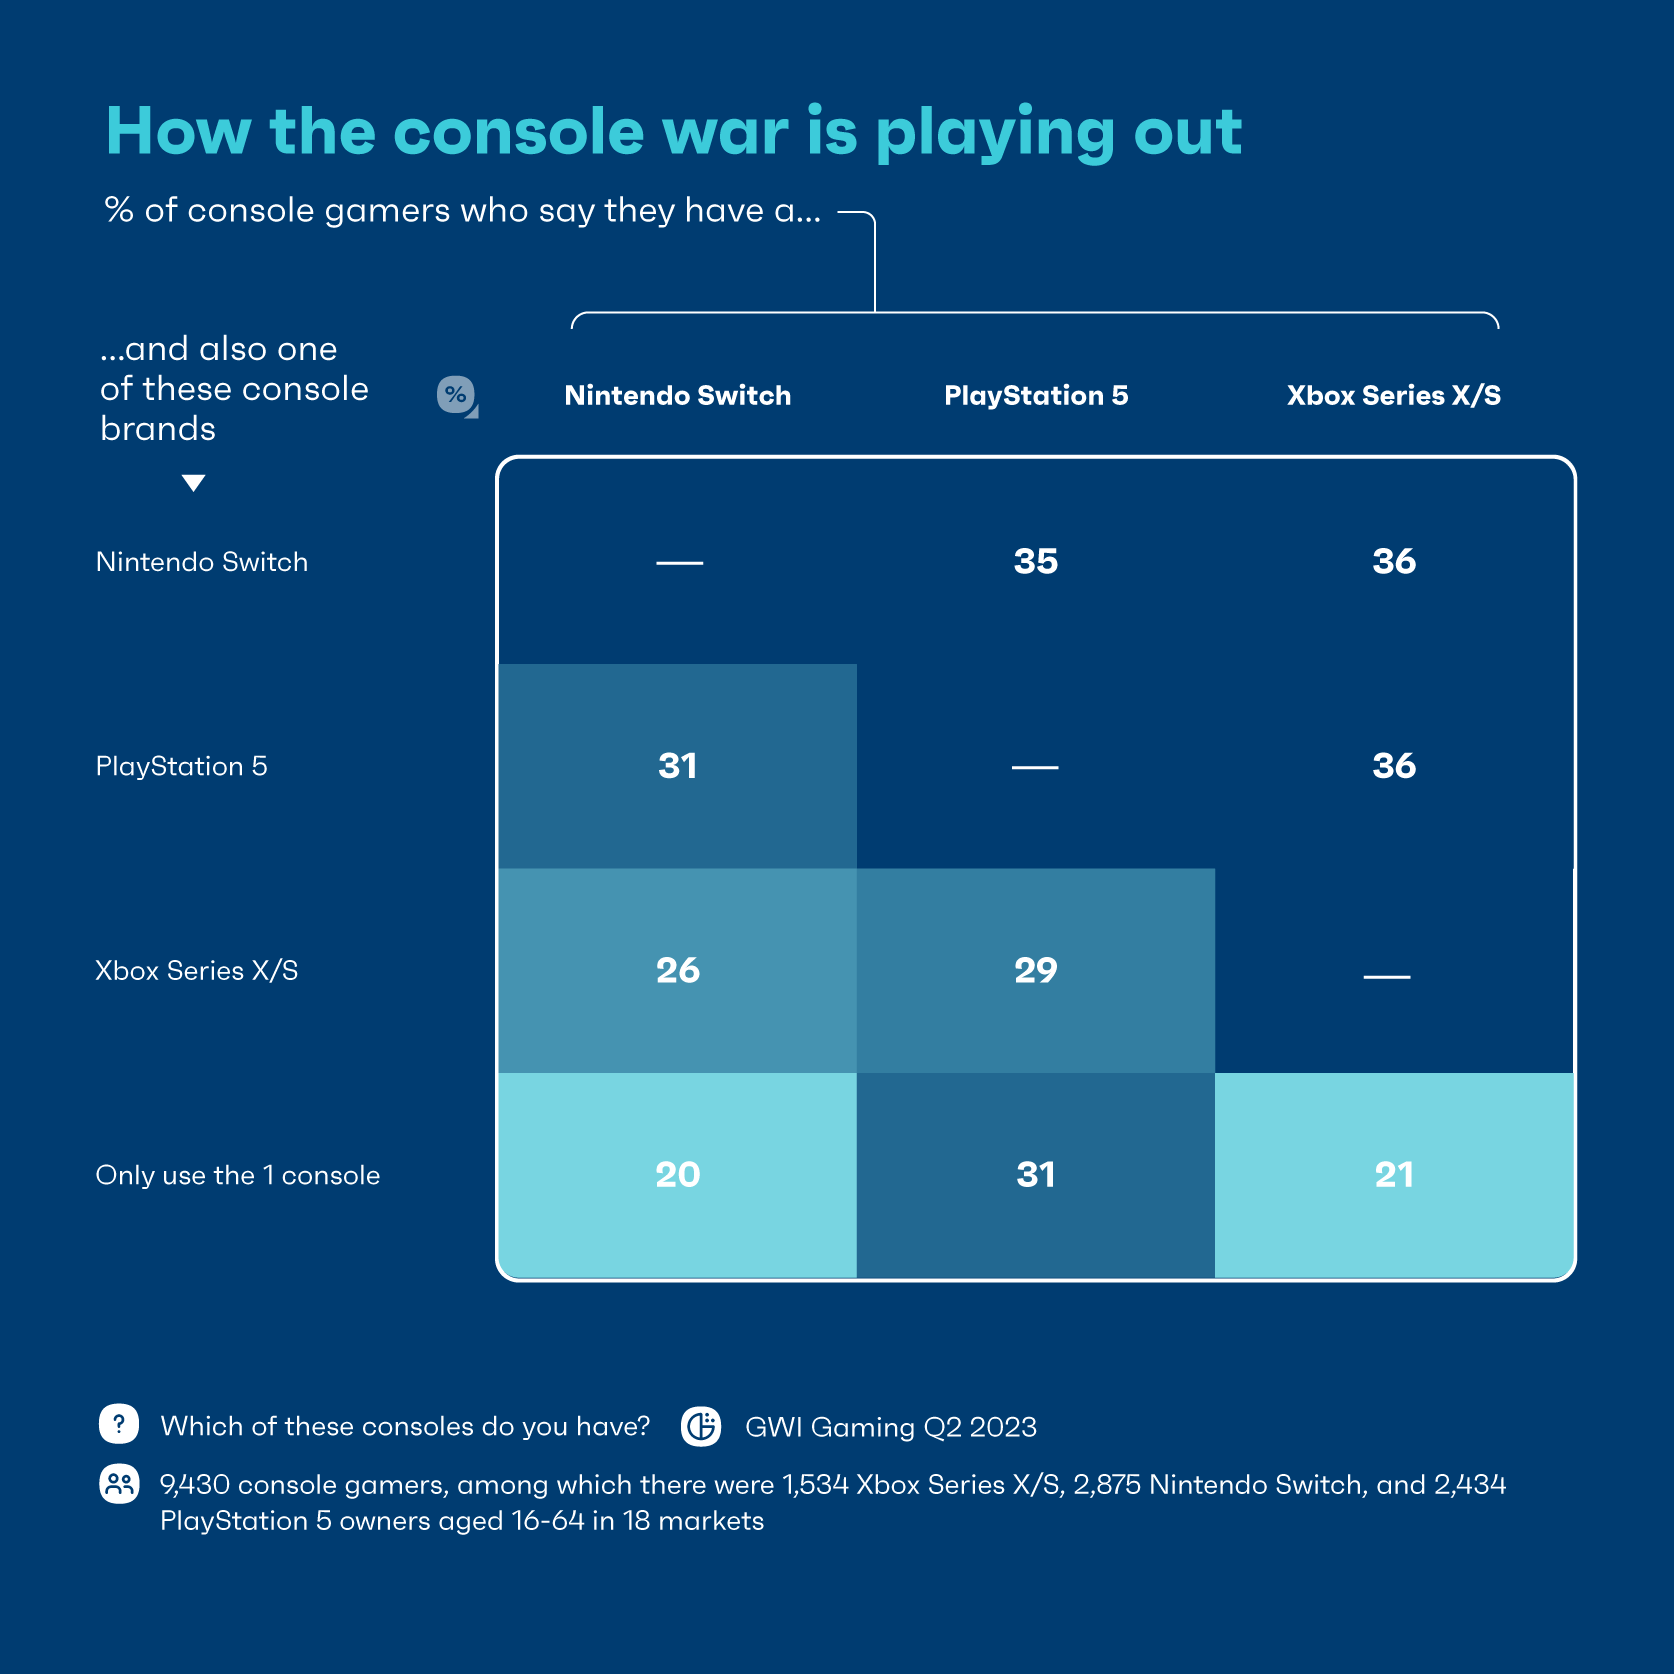 Chart showing which console gamers have by percentage